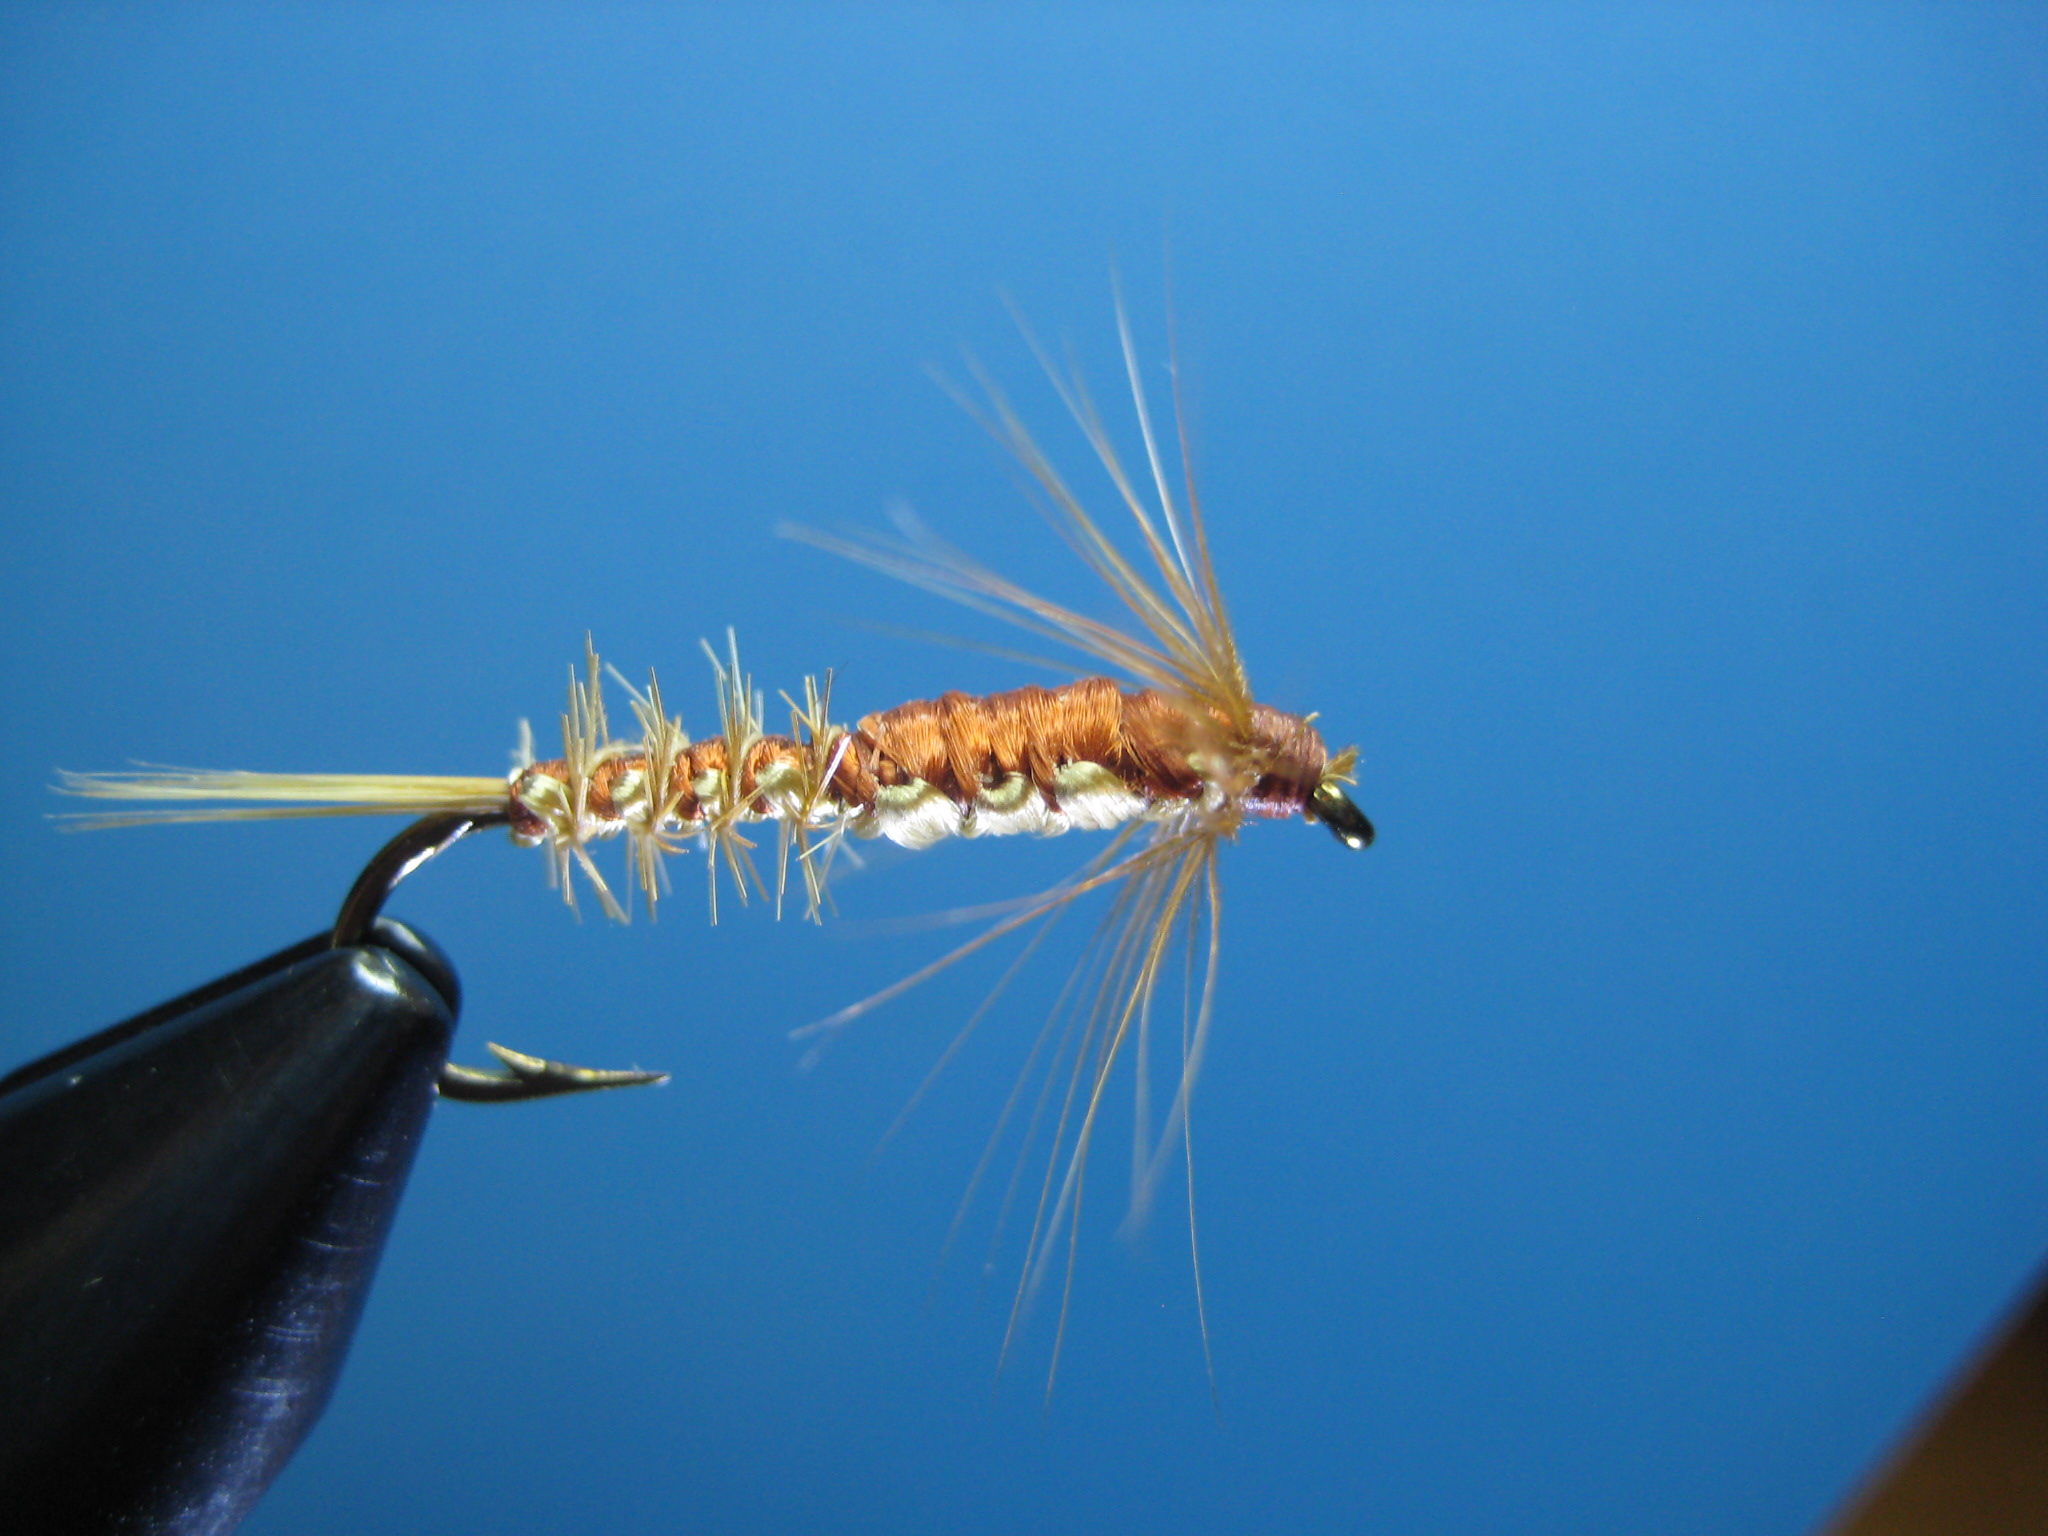 Hank Roberts woven body nymph - The Fly Tying Bench - Fly Tying